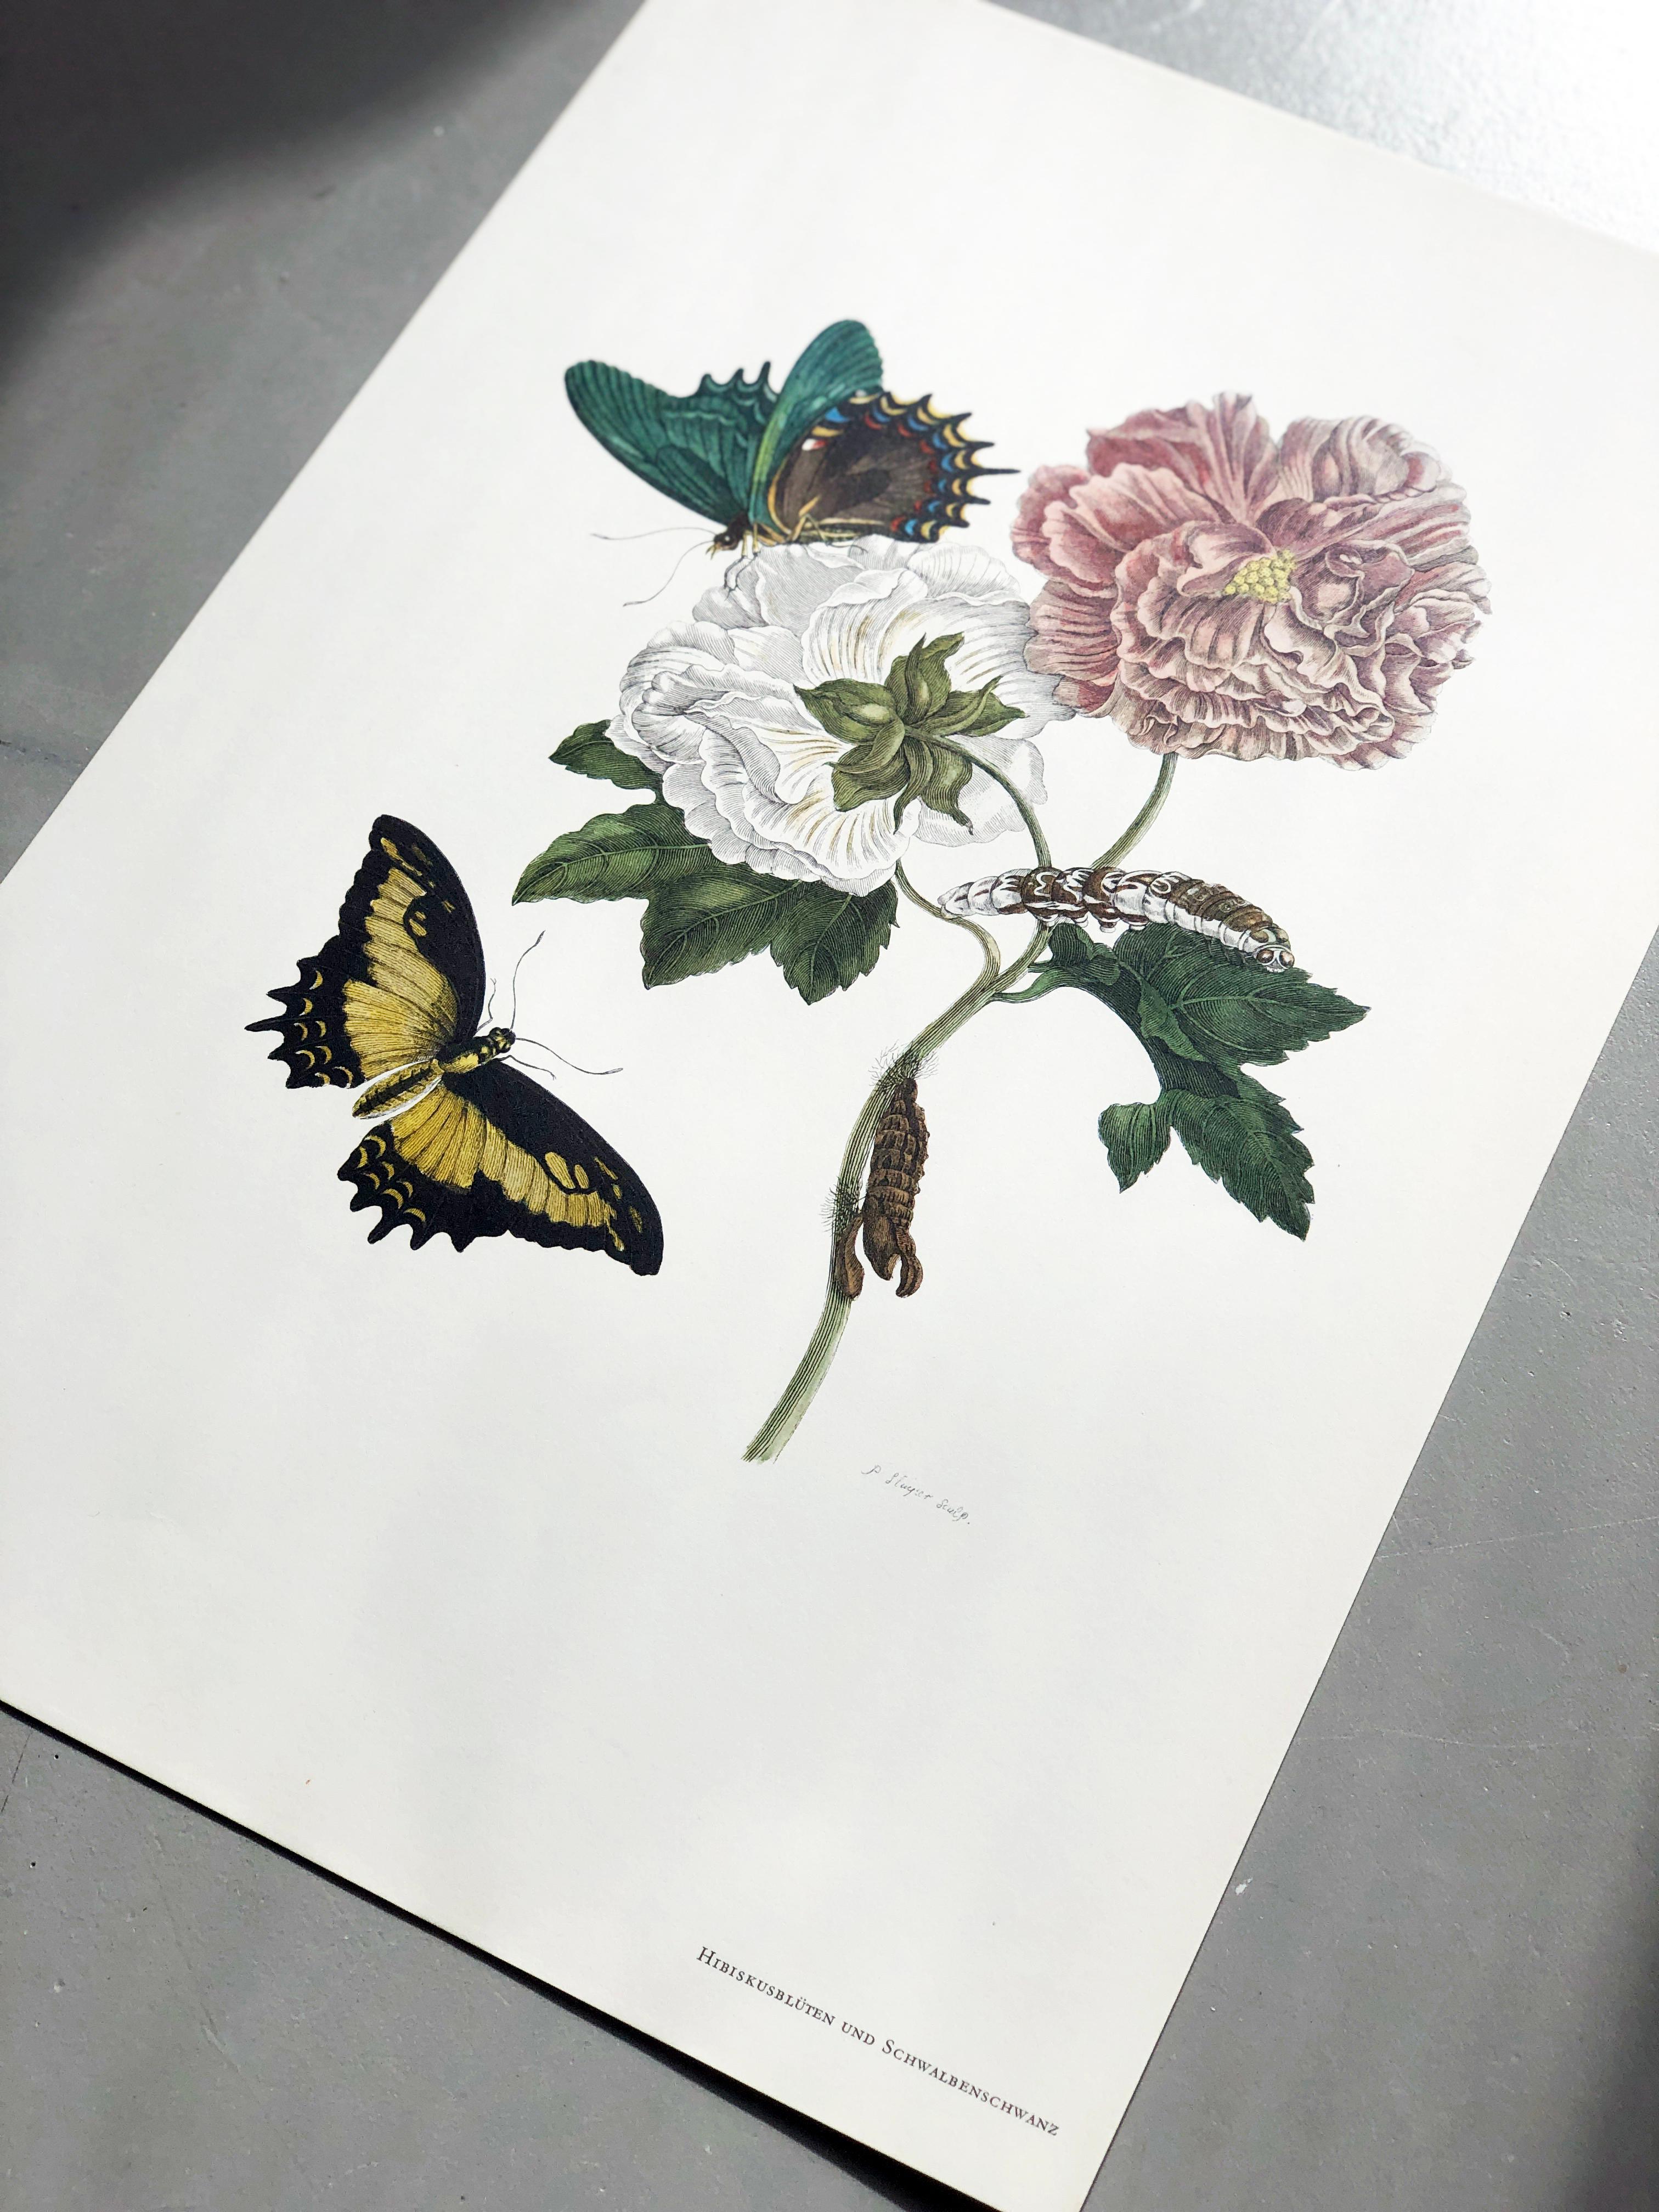 Other Maria Sibylla Merian - P. Sluyter - Hibiscus flowers and swallowtail Nr.31 For Sale